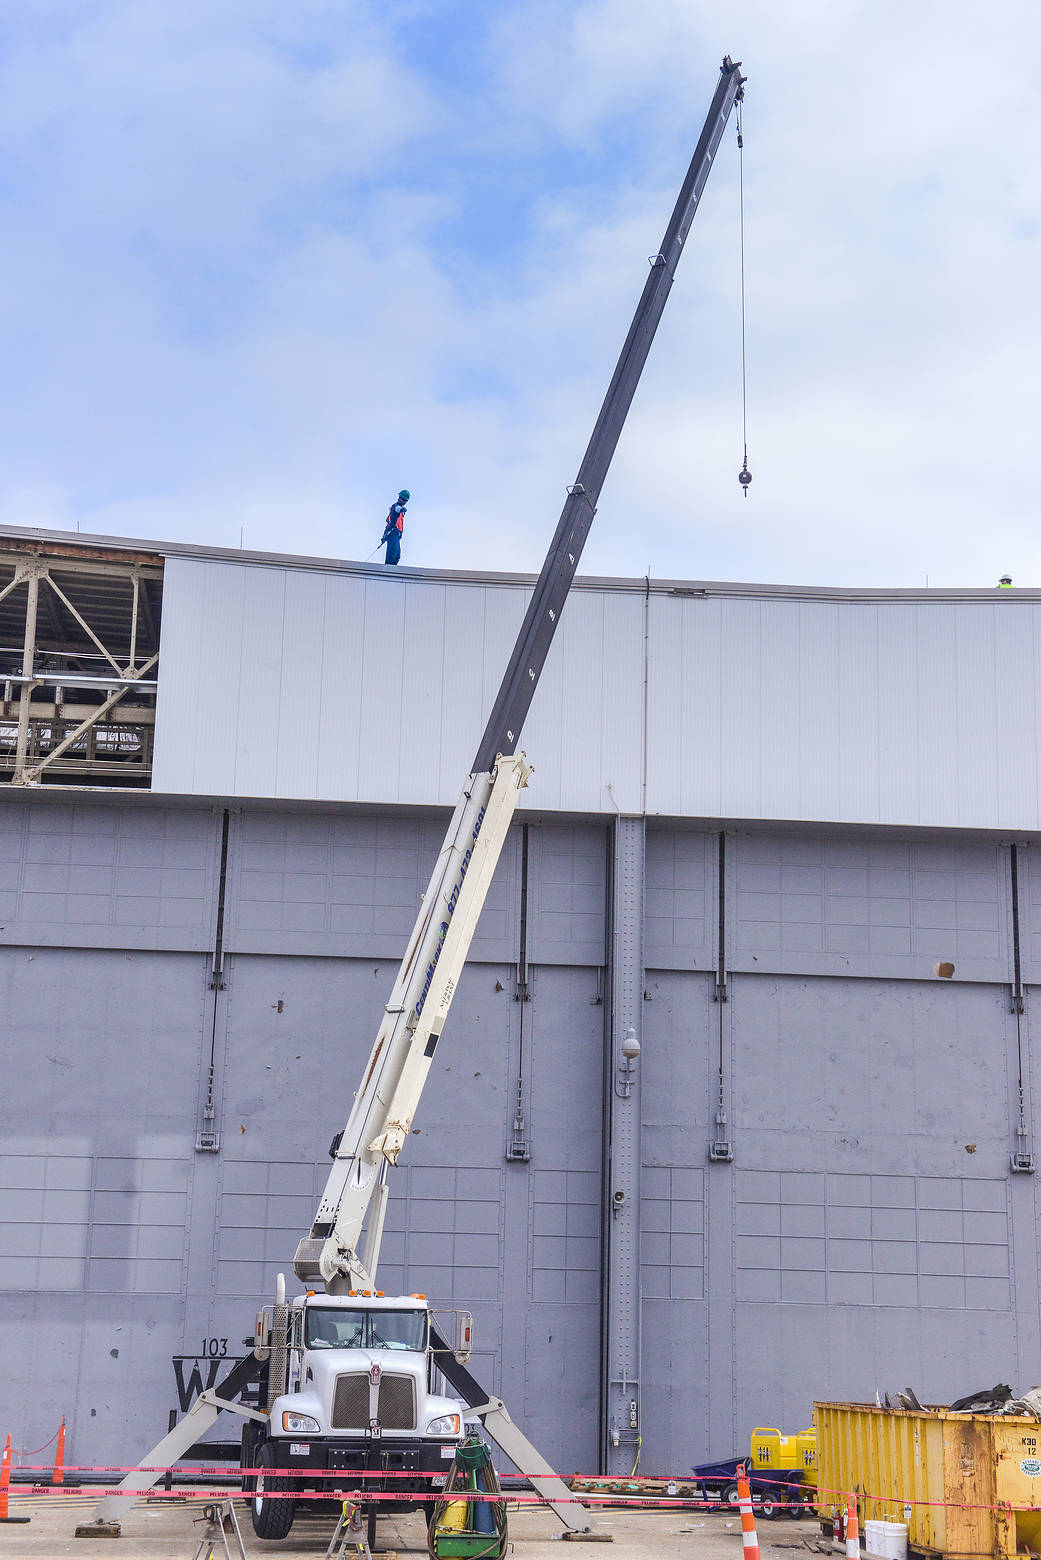 Workers began assessing and making roof repairs to the 43-acre rocket manufacturing building at NASA’s Michoud Assembly Facility